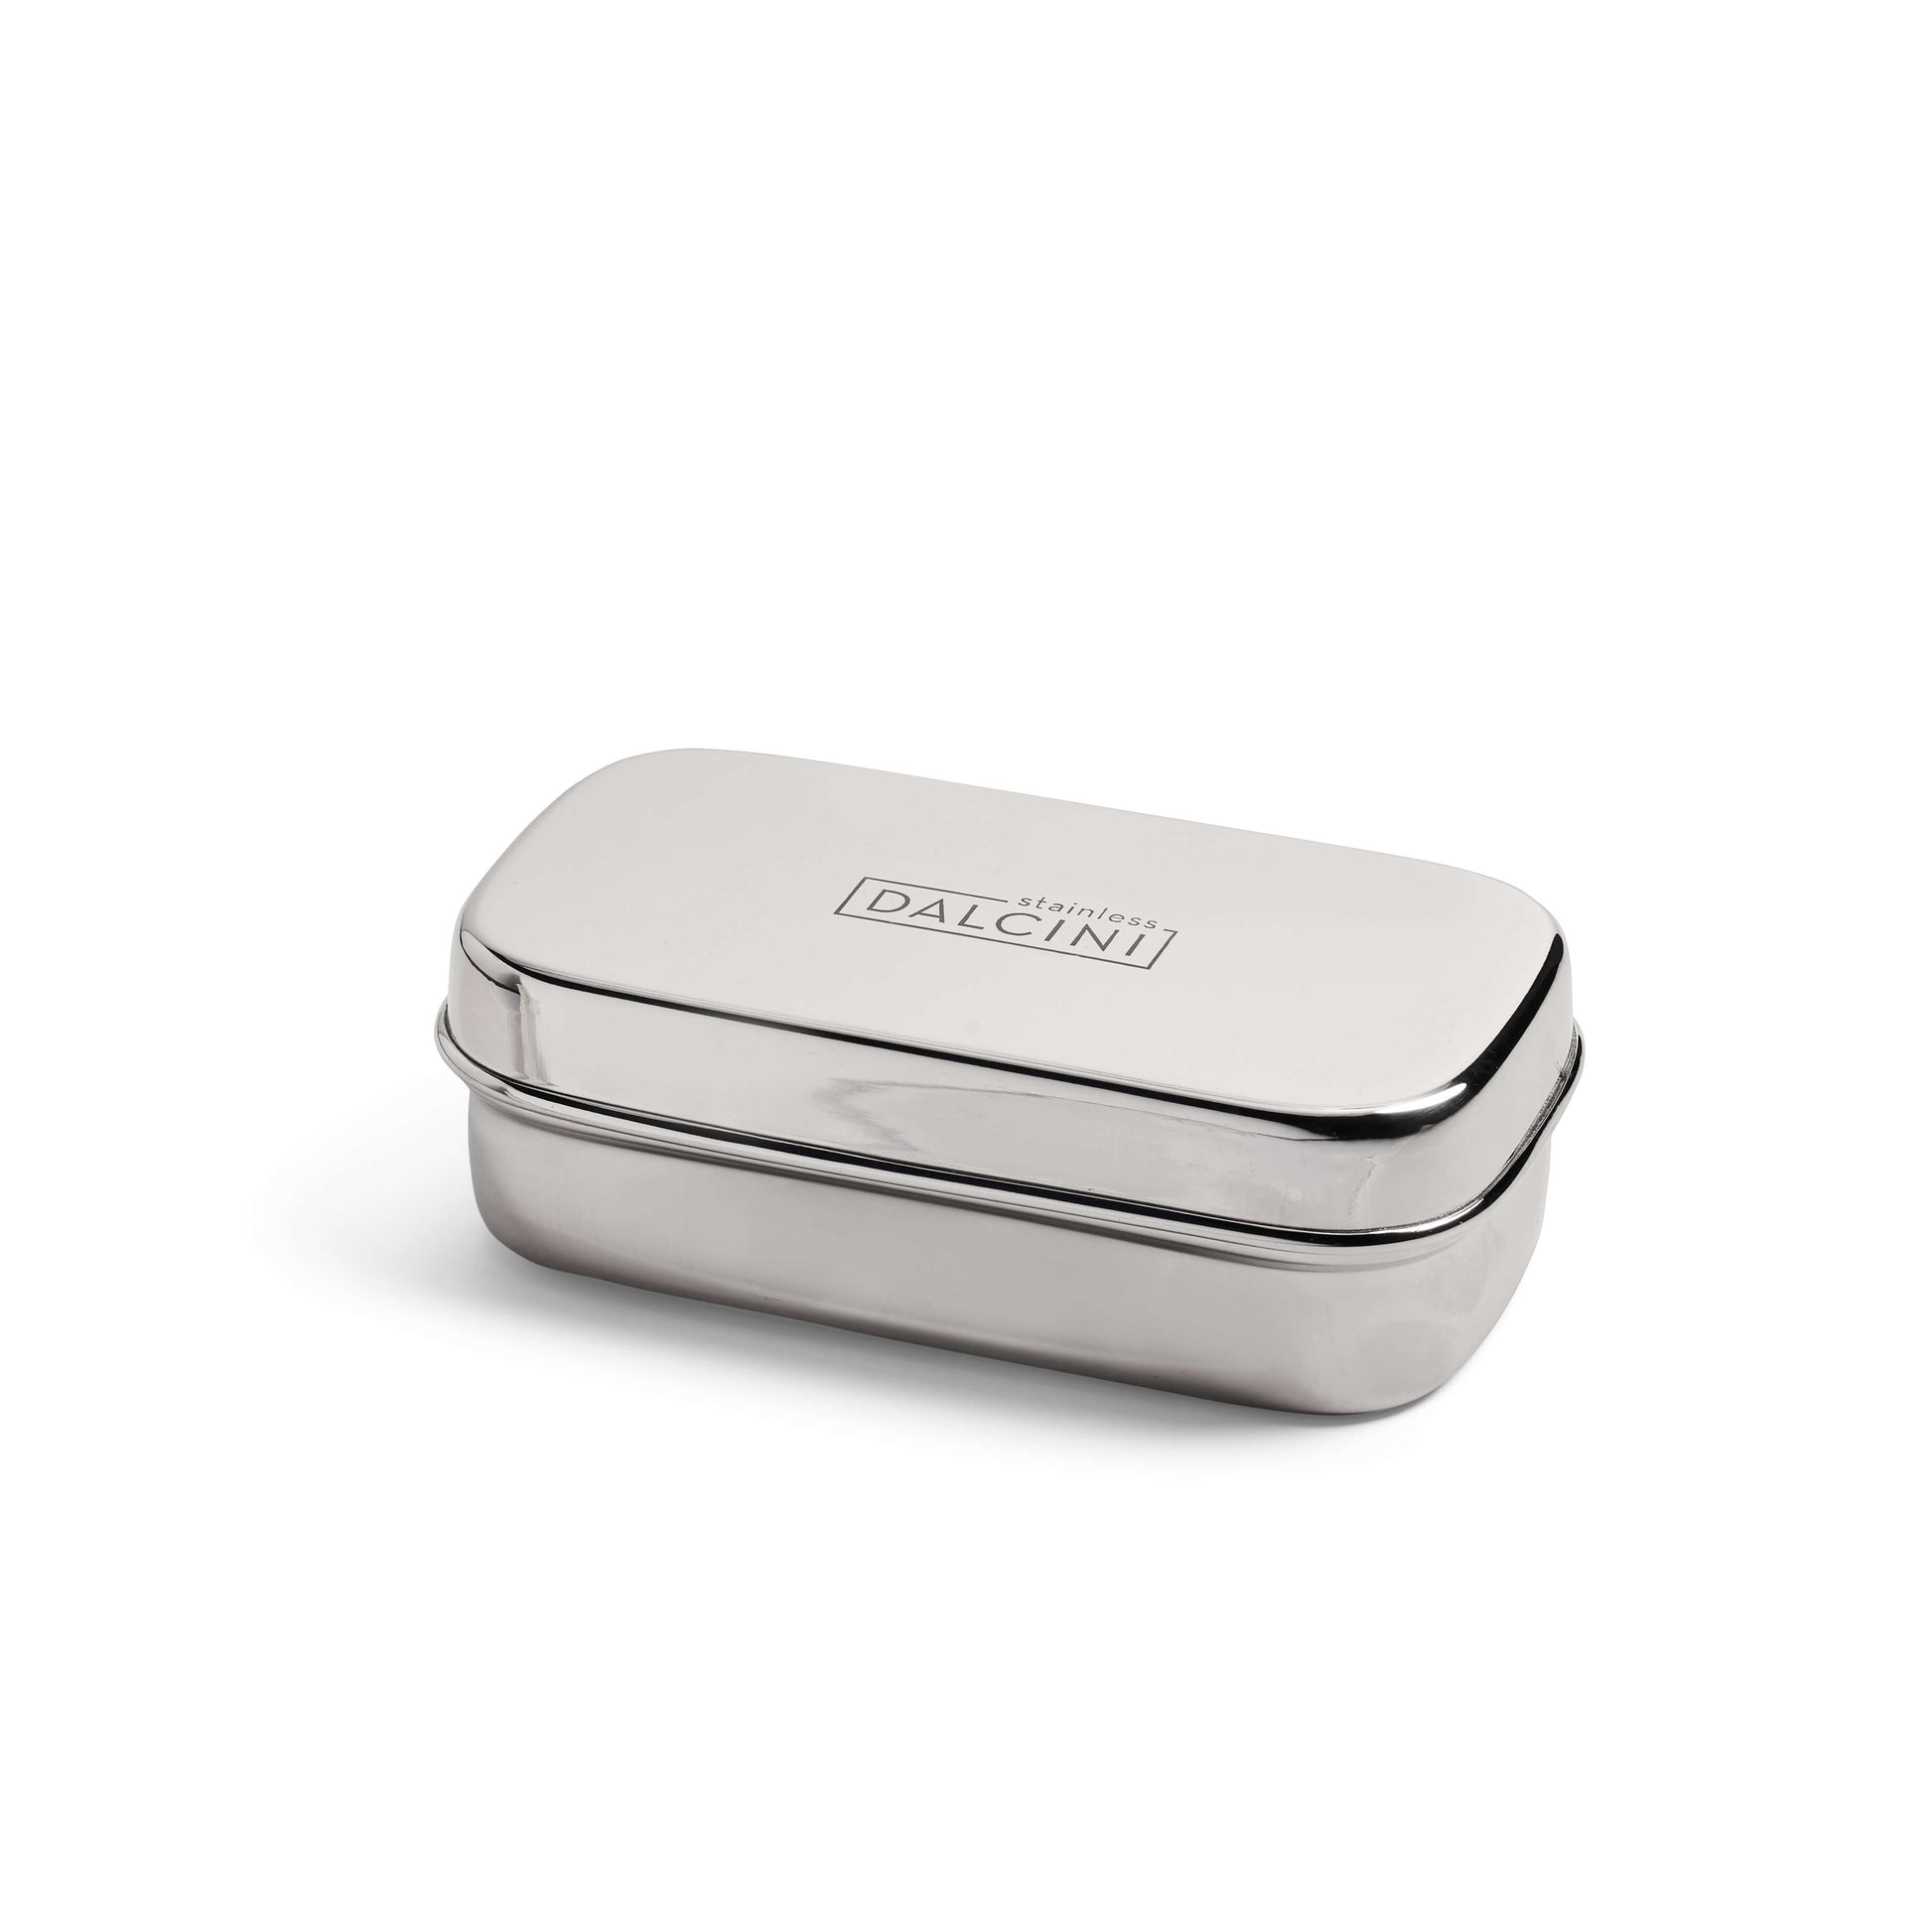 Stainless steel snack box with closed lid